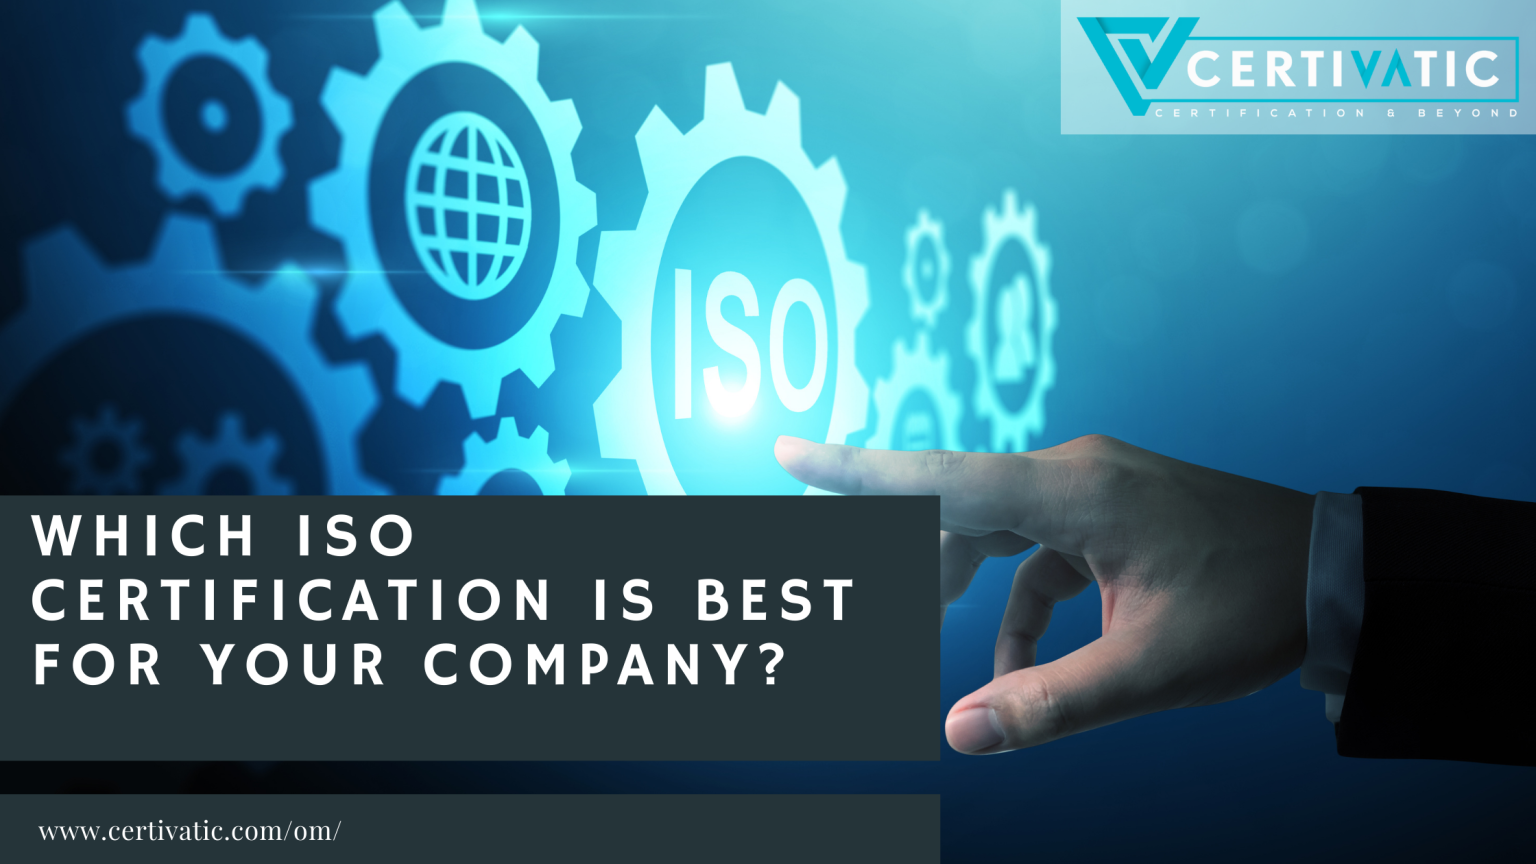 Which iso certification is best for your company?